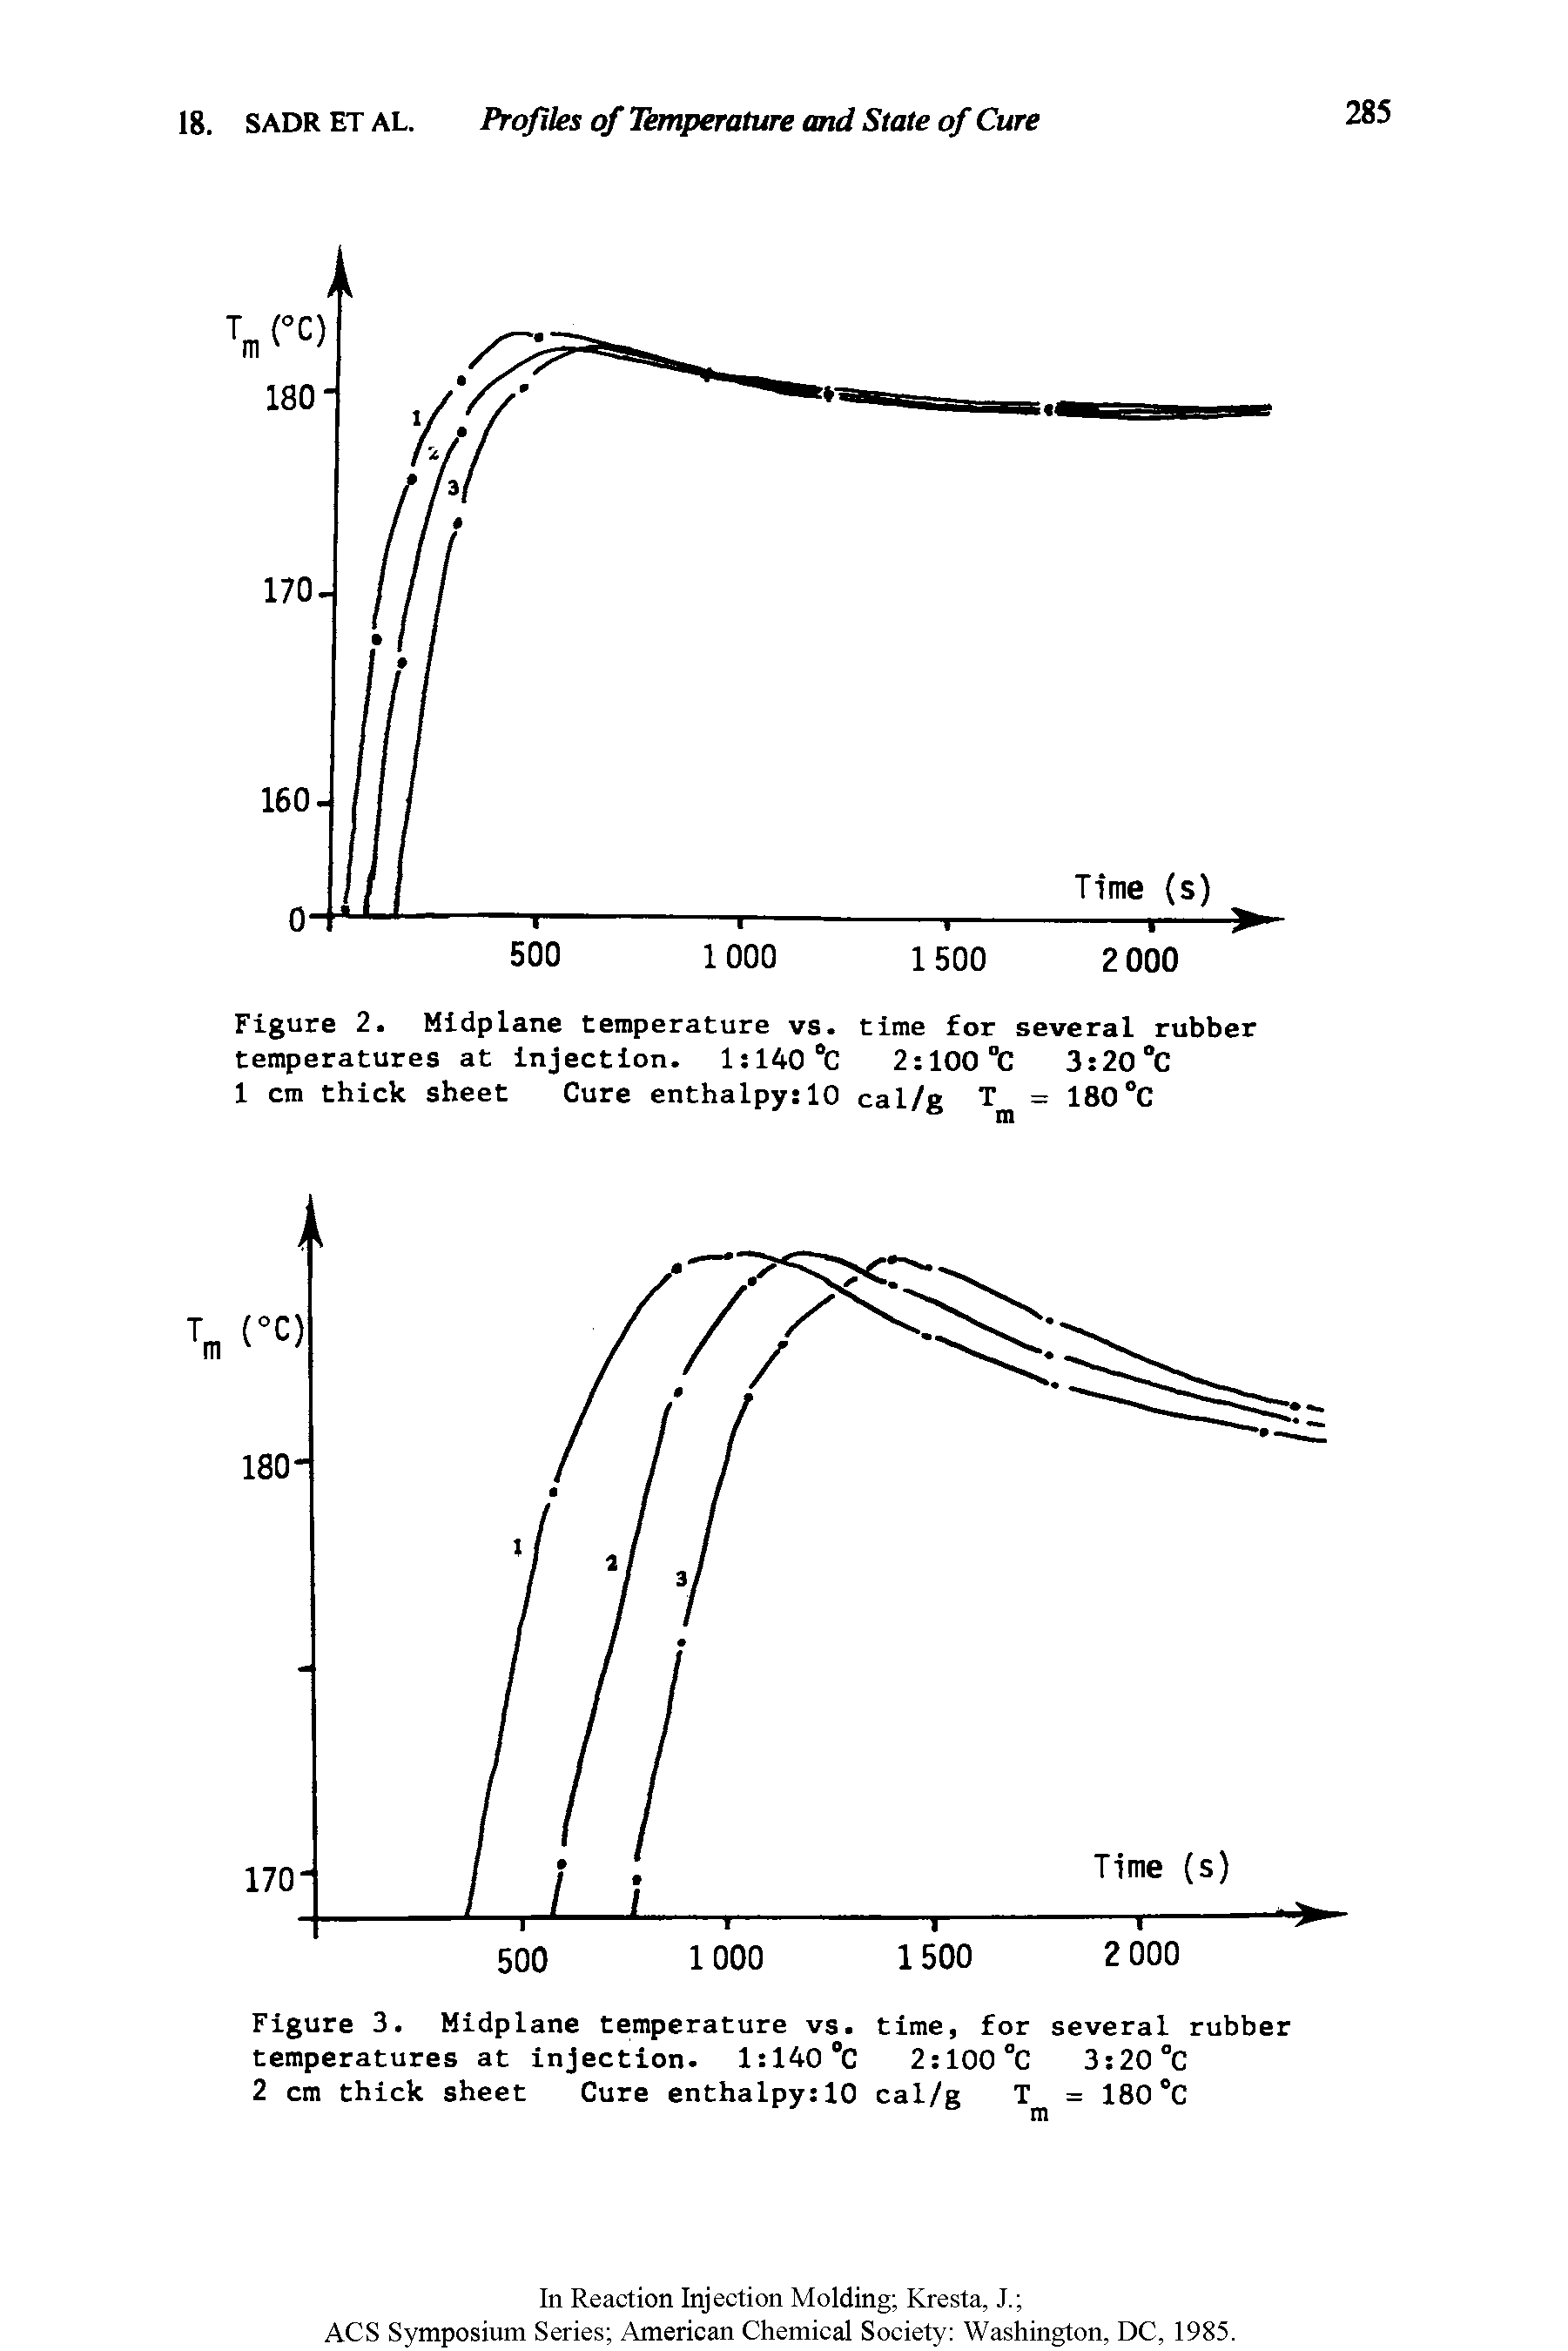 Figure 2. Midplane temperature vs. time for several rubber temperatures at injection. 1 140°C 2 100°C 3 20°C...